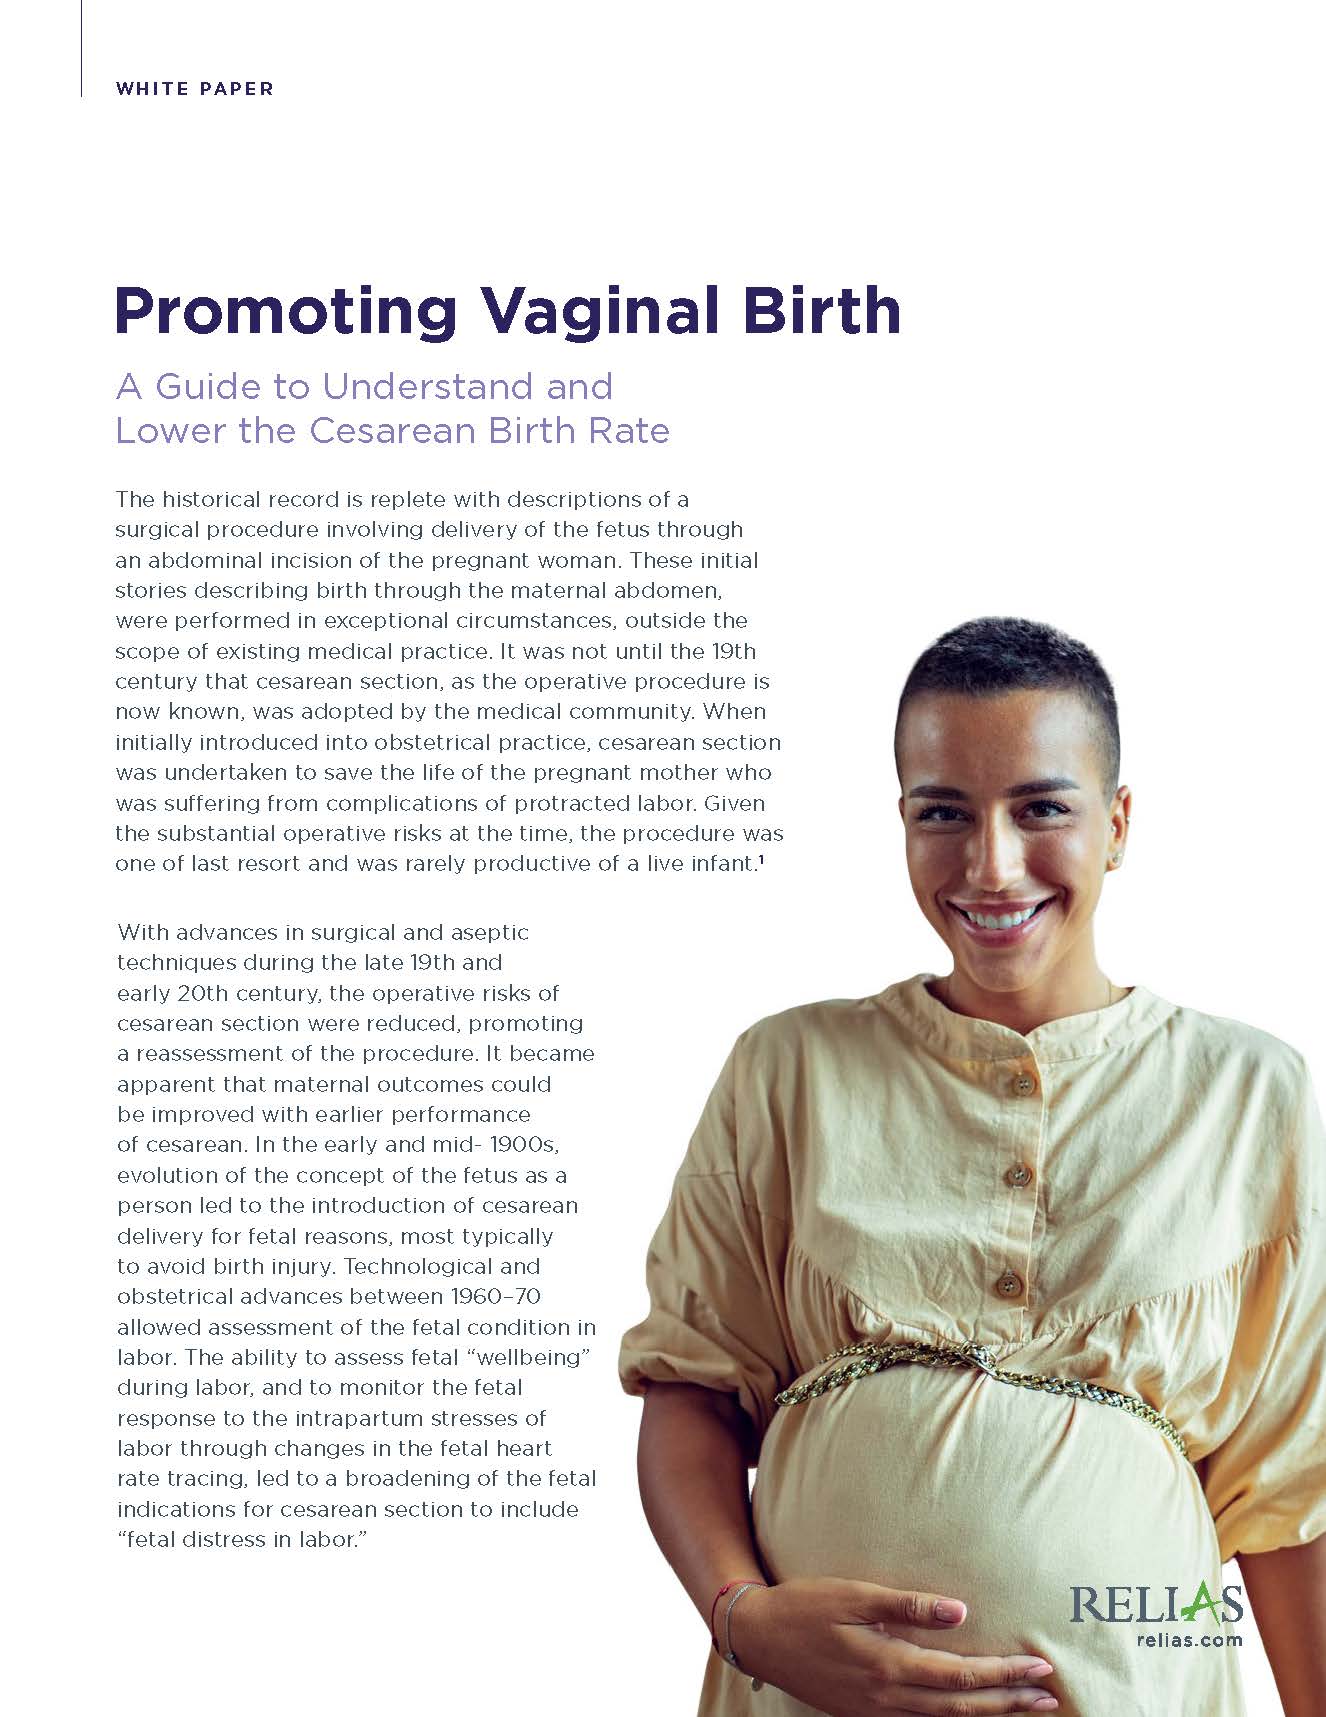 https://www.relias.com/wp-content/uploads/2021/03/21-ACU-2912-Whitepaper-PromotingVaginalBirths-Update_front-page.jpg